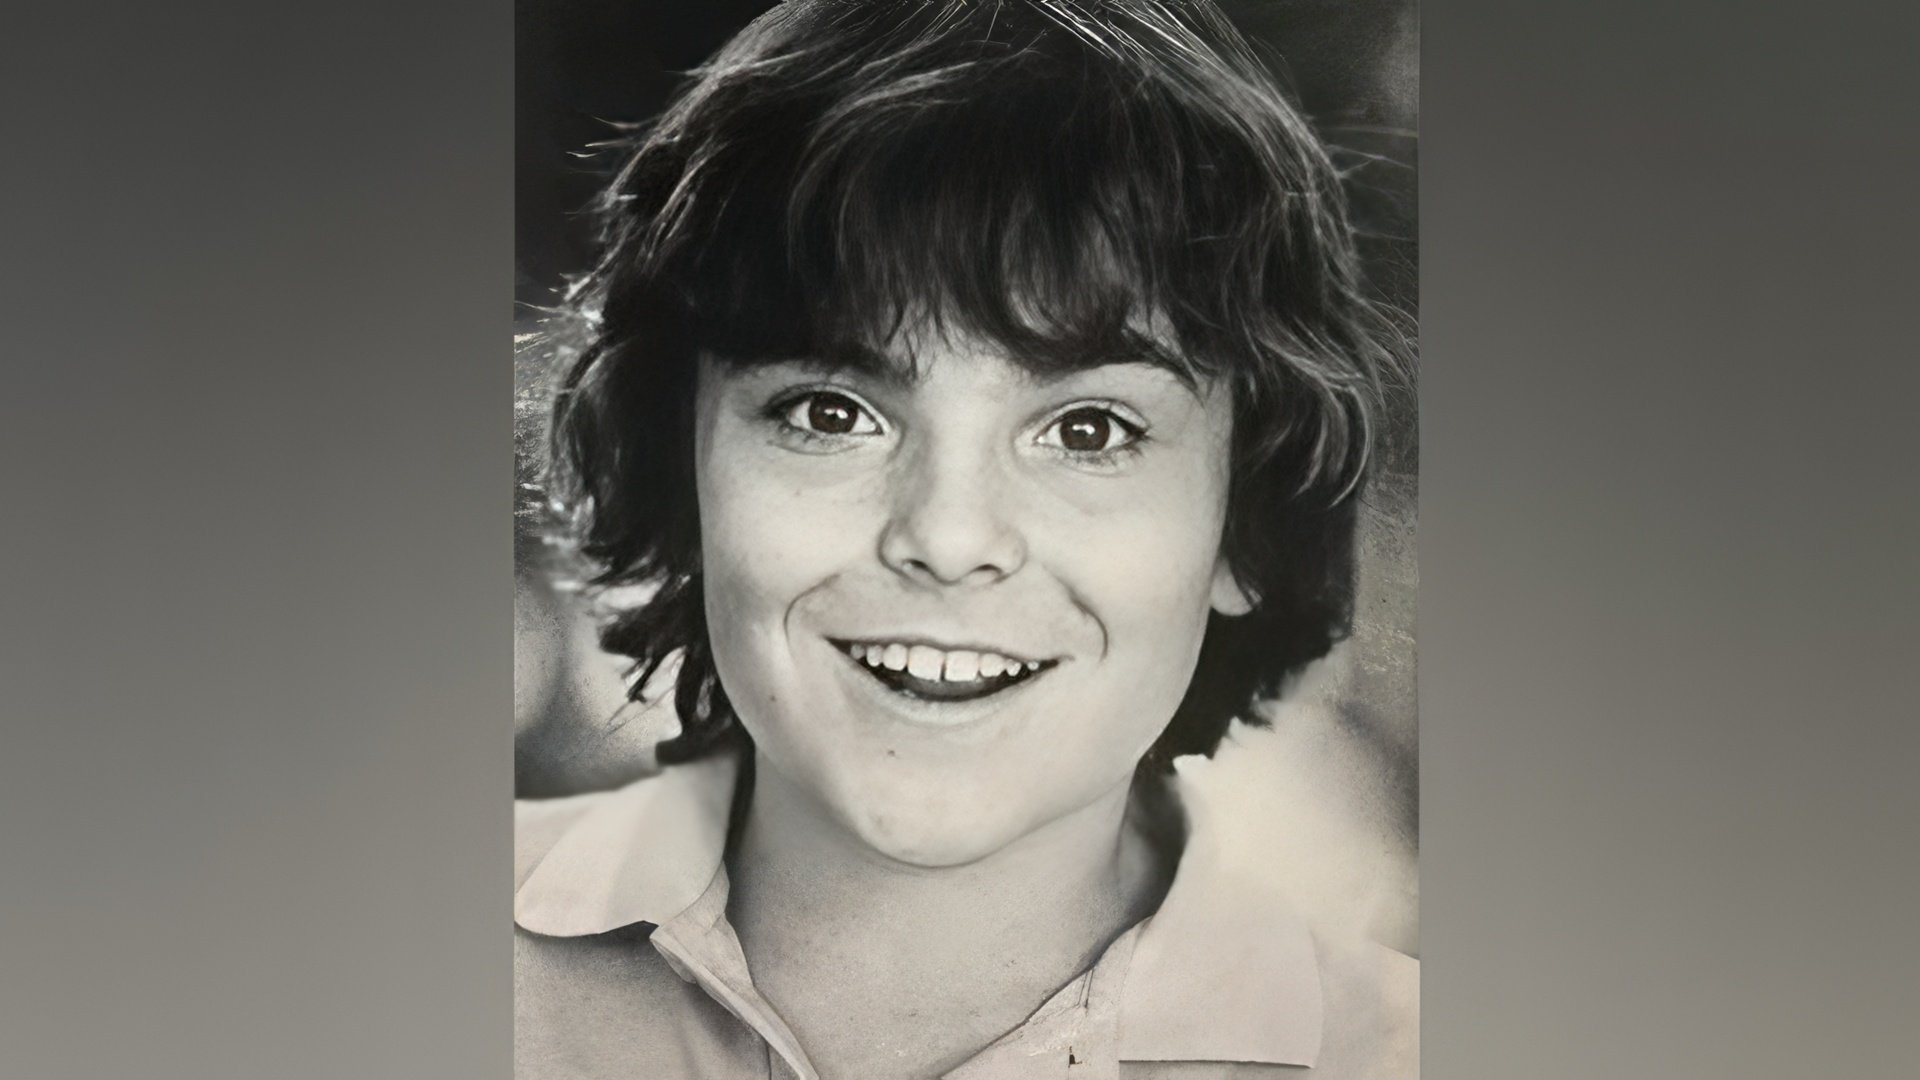 Jack Black in youth